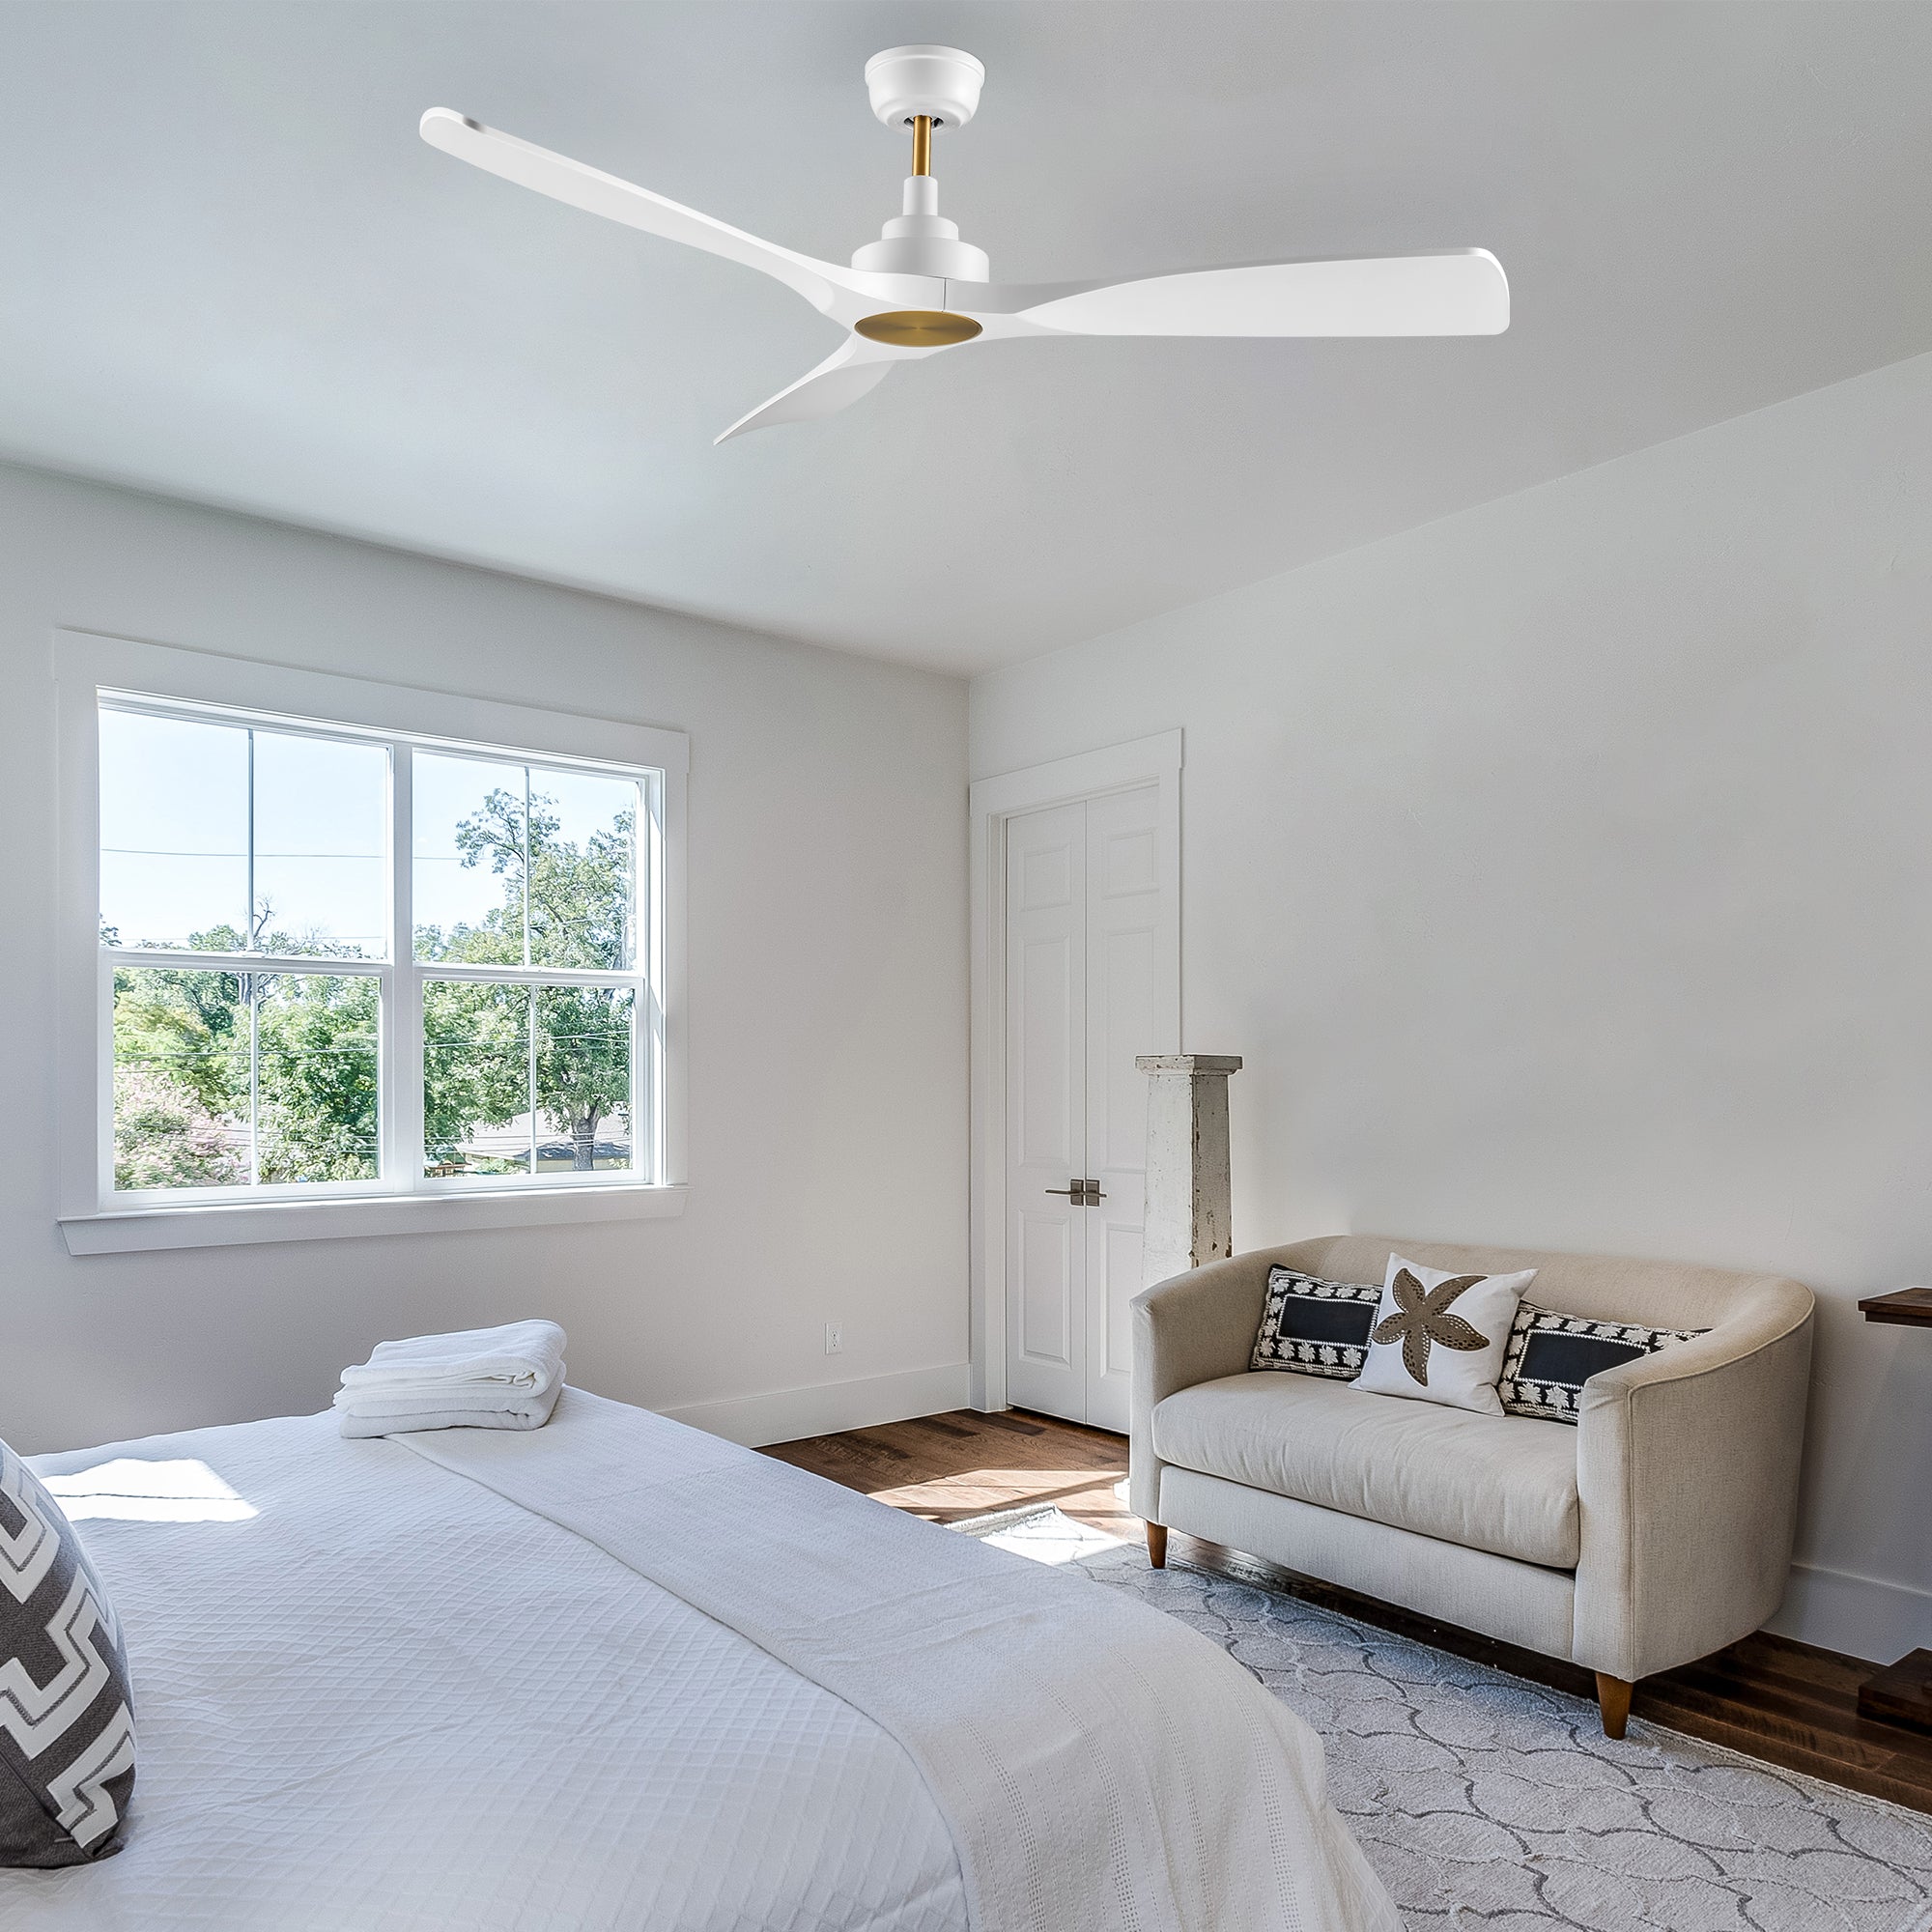 This Kilmory 52" ceiling fan keeps your space cool and stylish. It is a soft modern masterpiece perfect for your large indoor living spaces. This ceiling fan is a simplicity designing with Black finish, use very strong ABS blades. The fan features Remote control to set fan preferences. #color_White